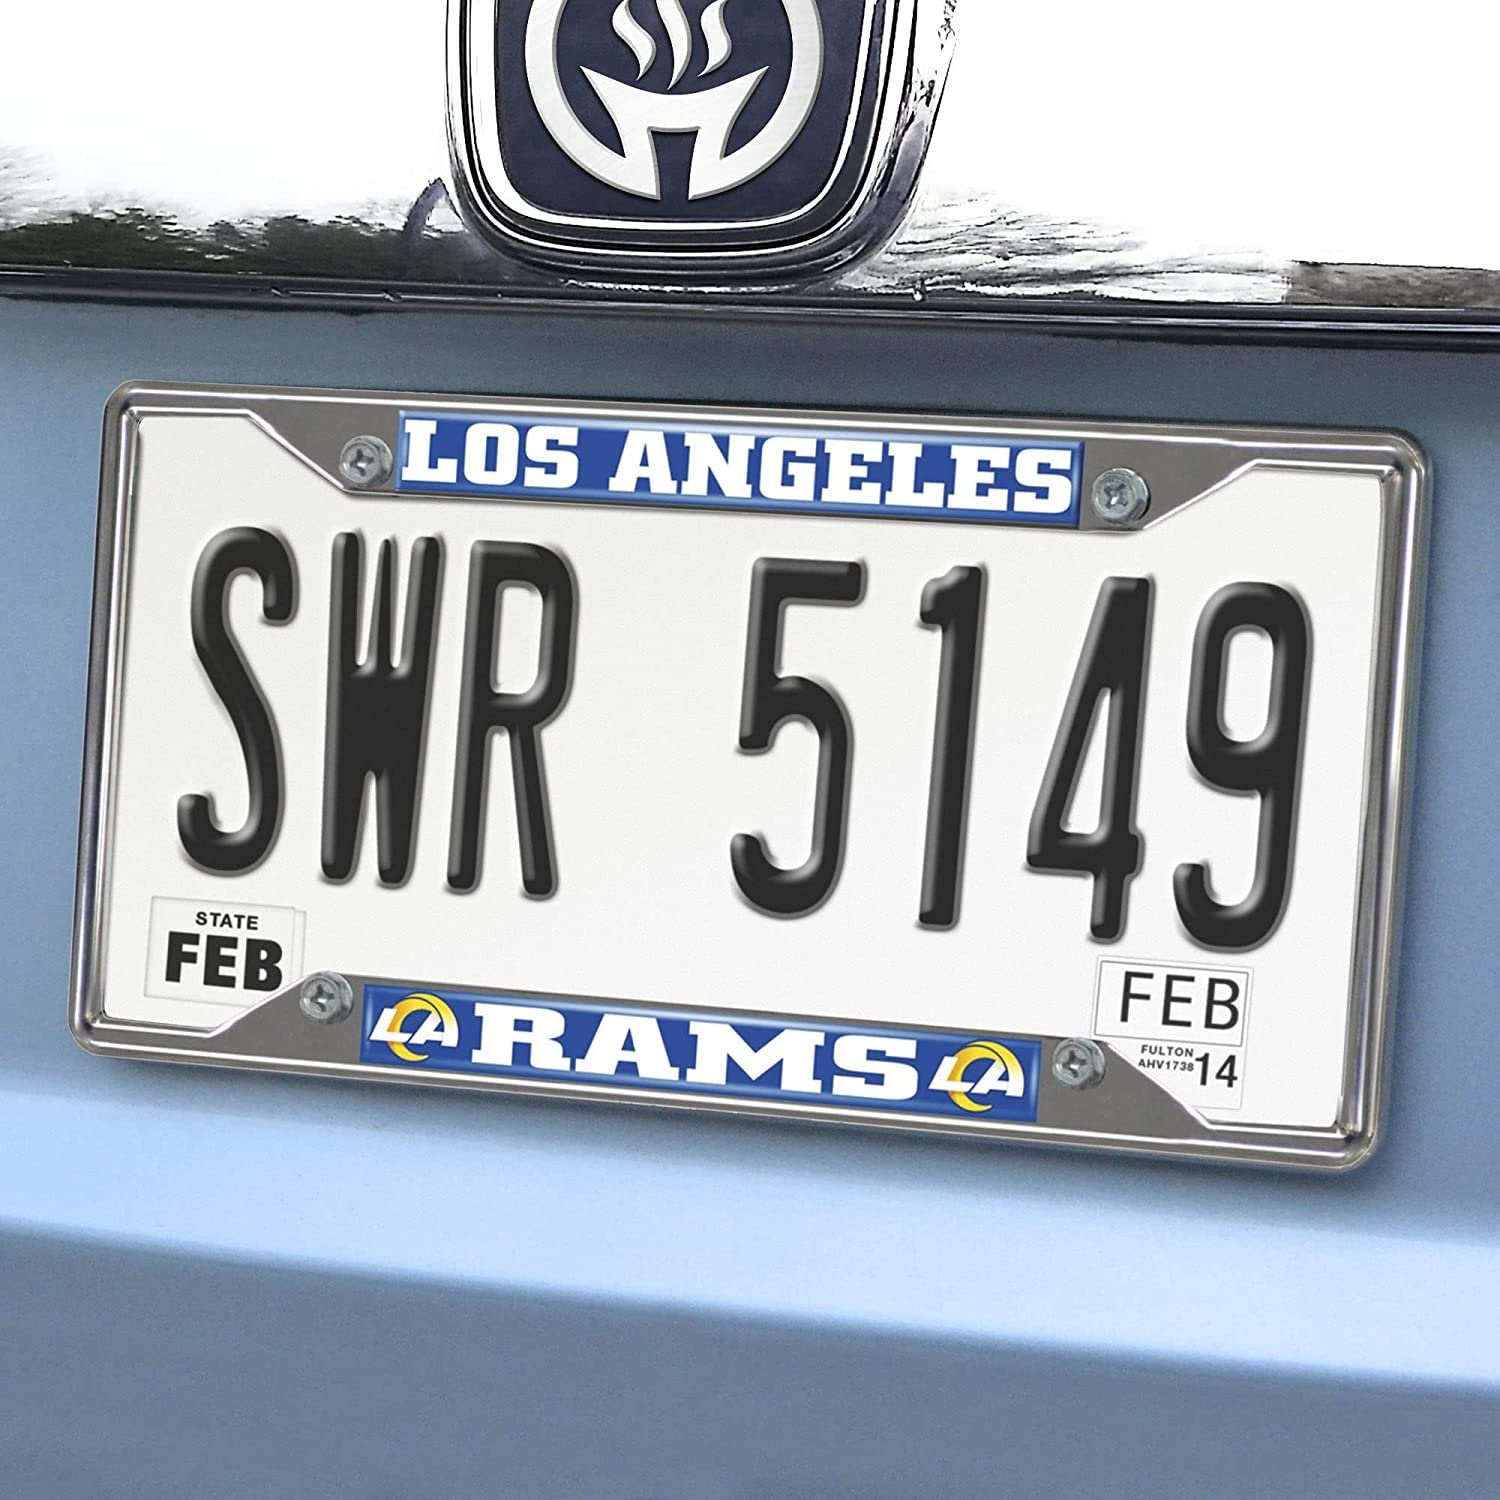 Los Angeles Rams Metal License Plate Frame Chrome Tag Cover 6x12 Inch